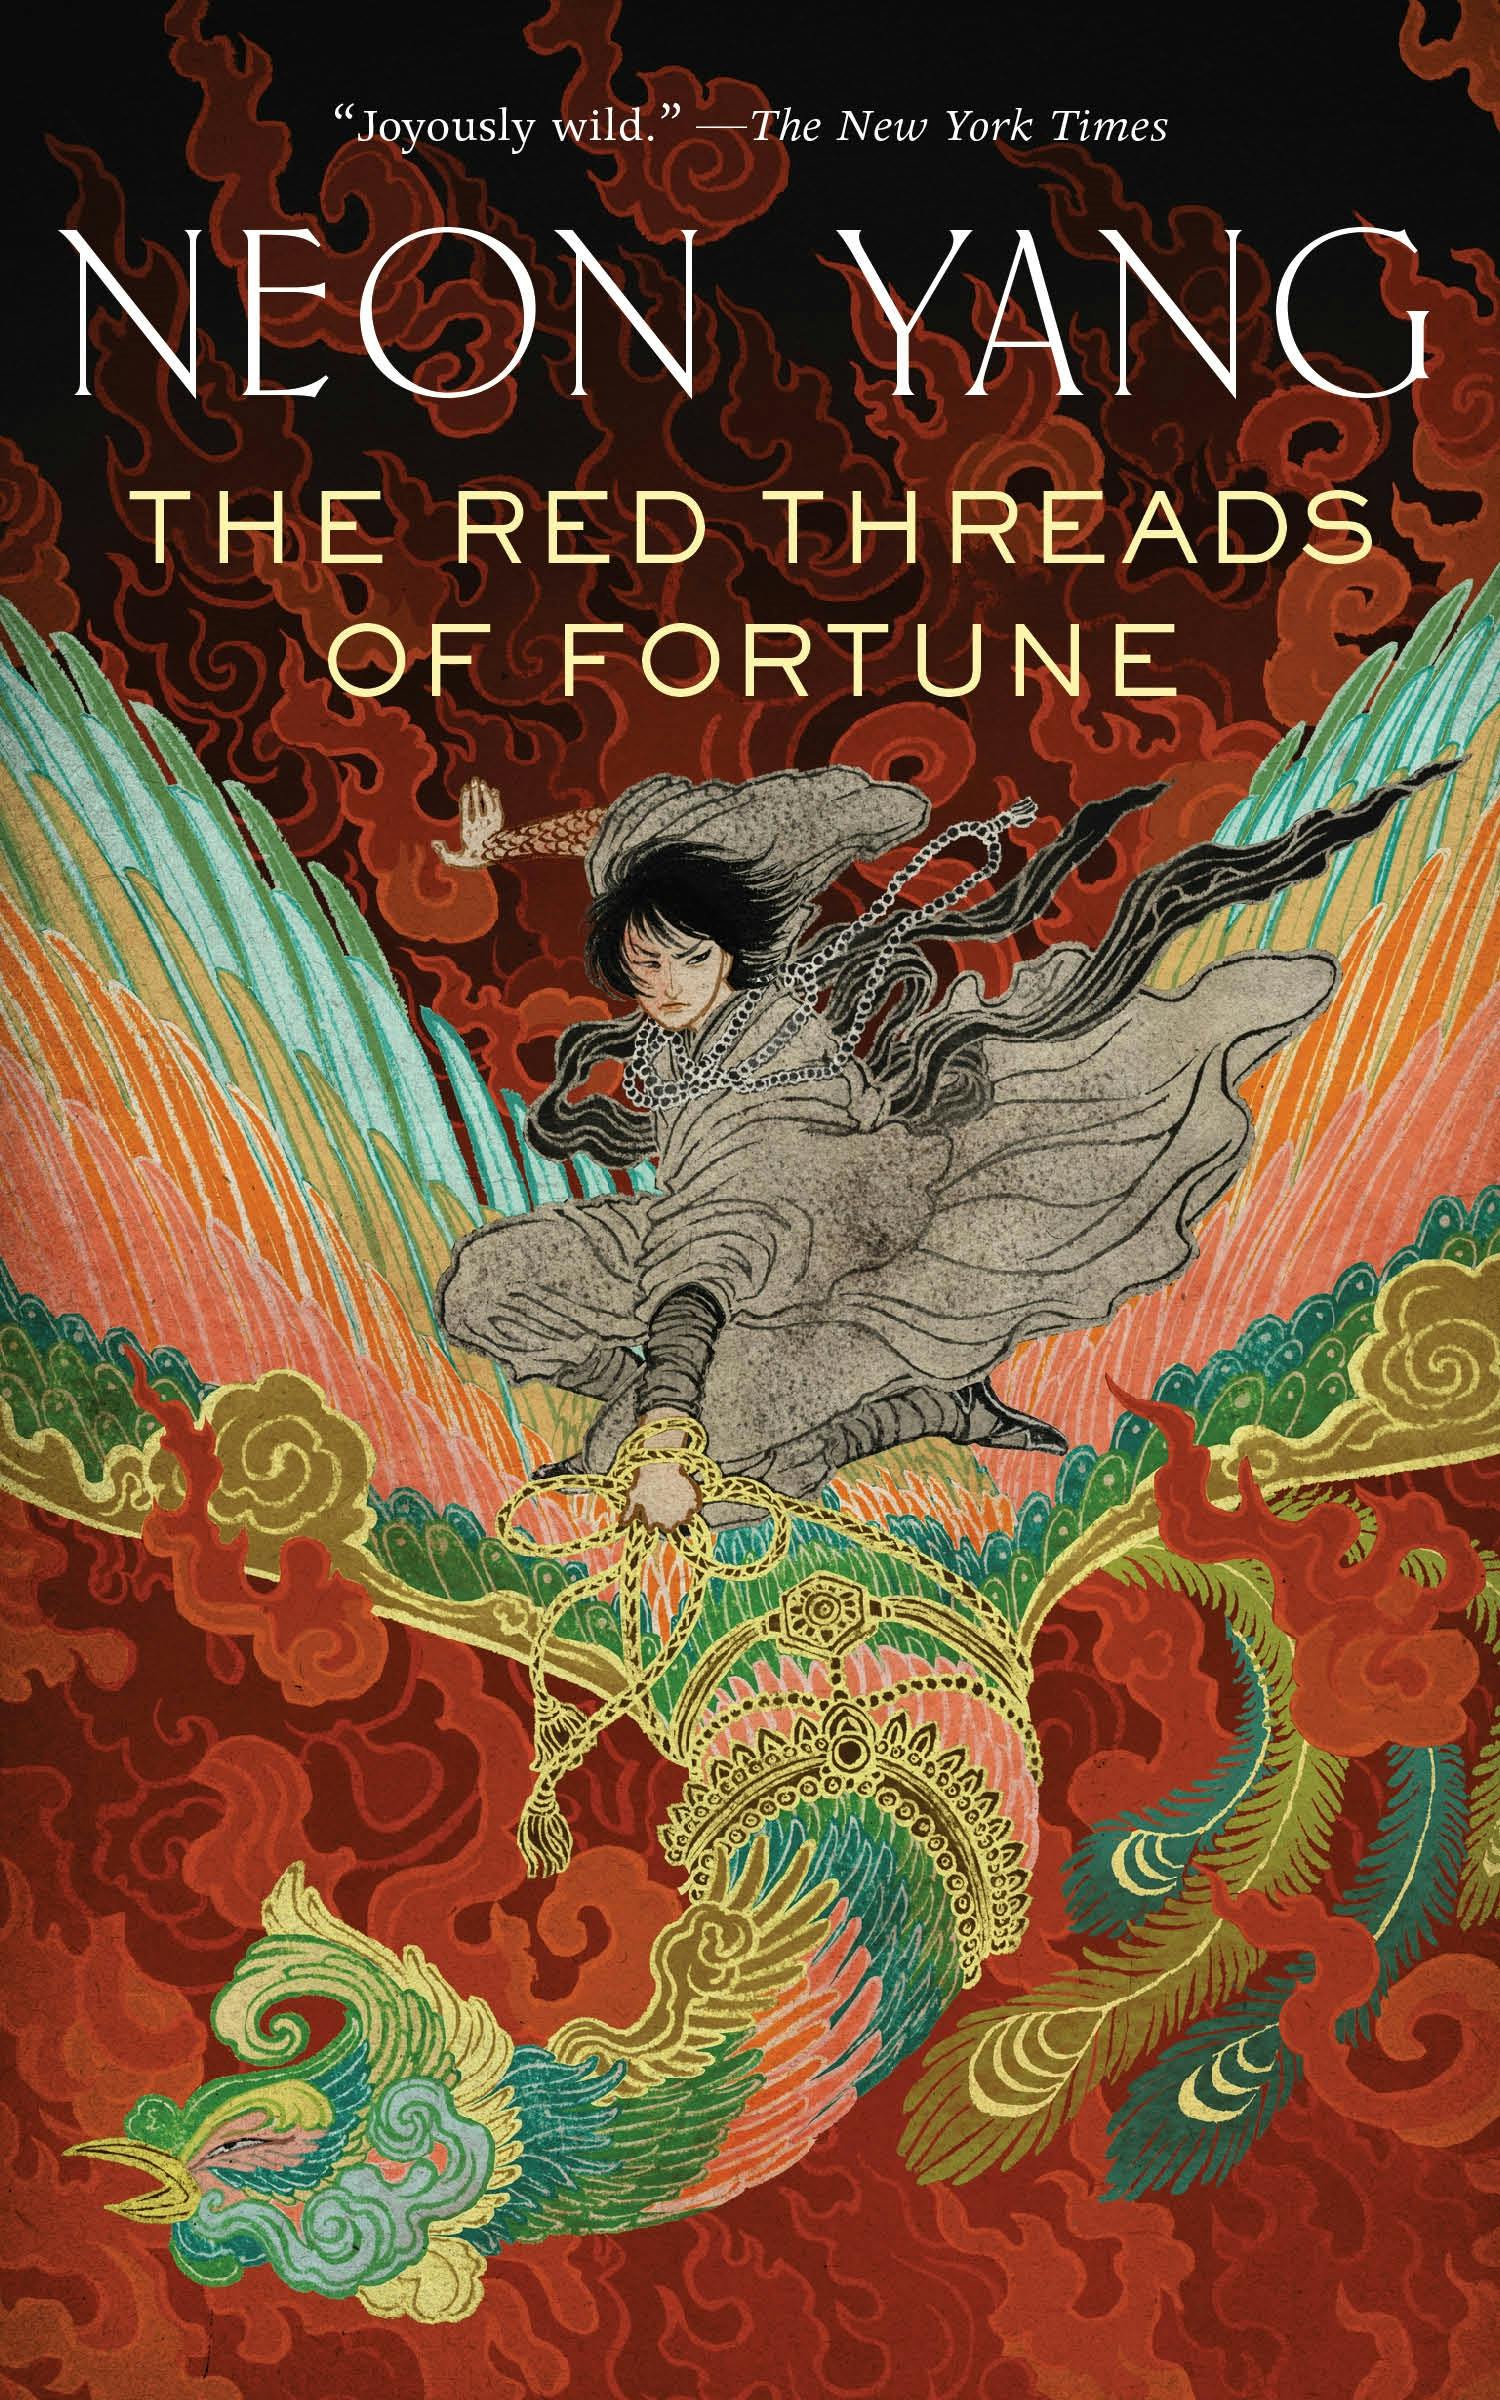 Cover for the book titled as: The Red Threads of Fortune